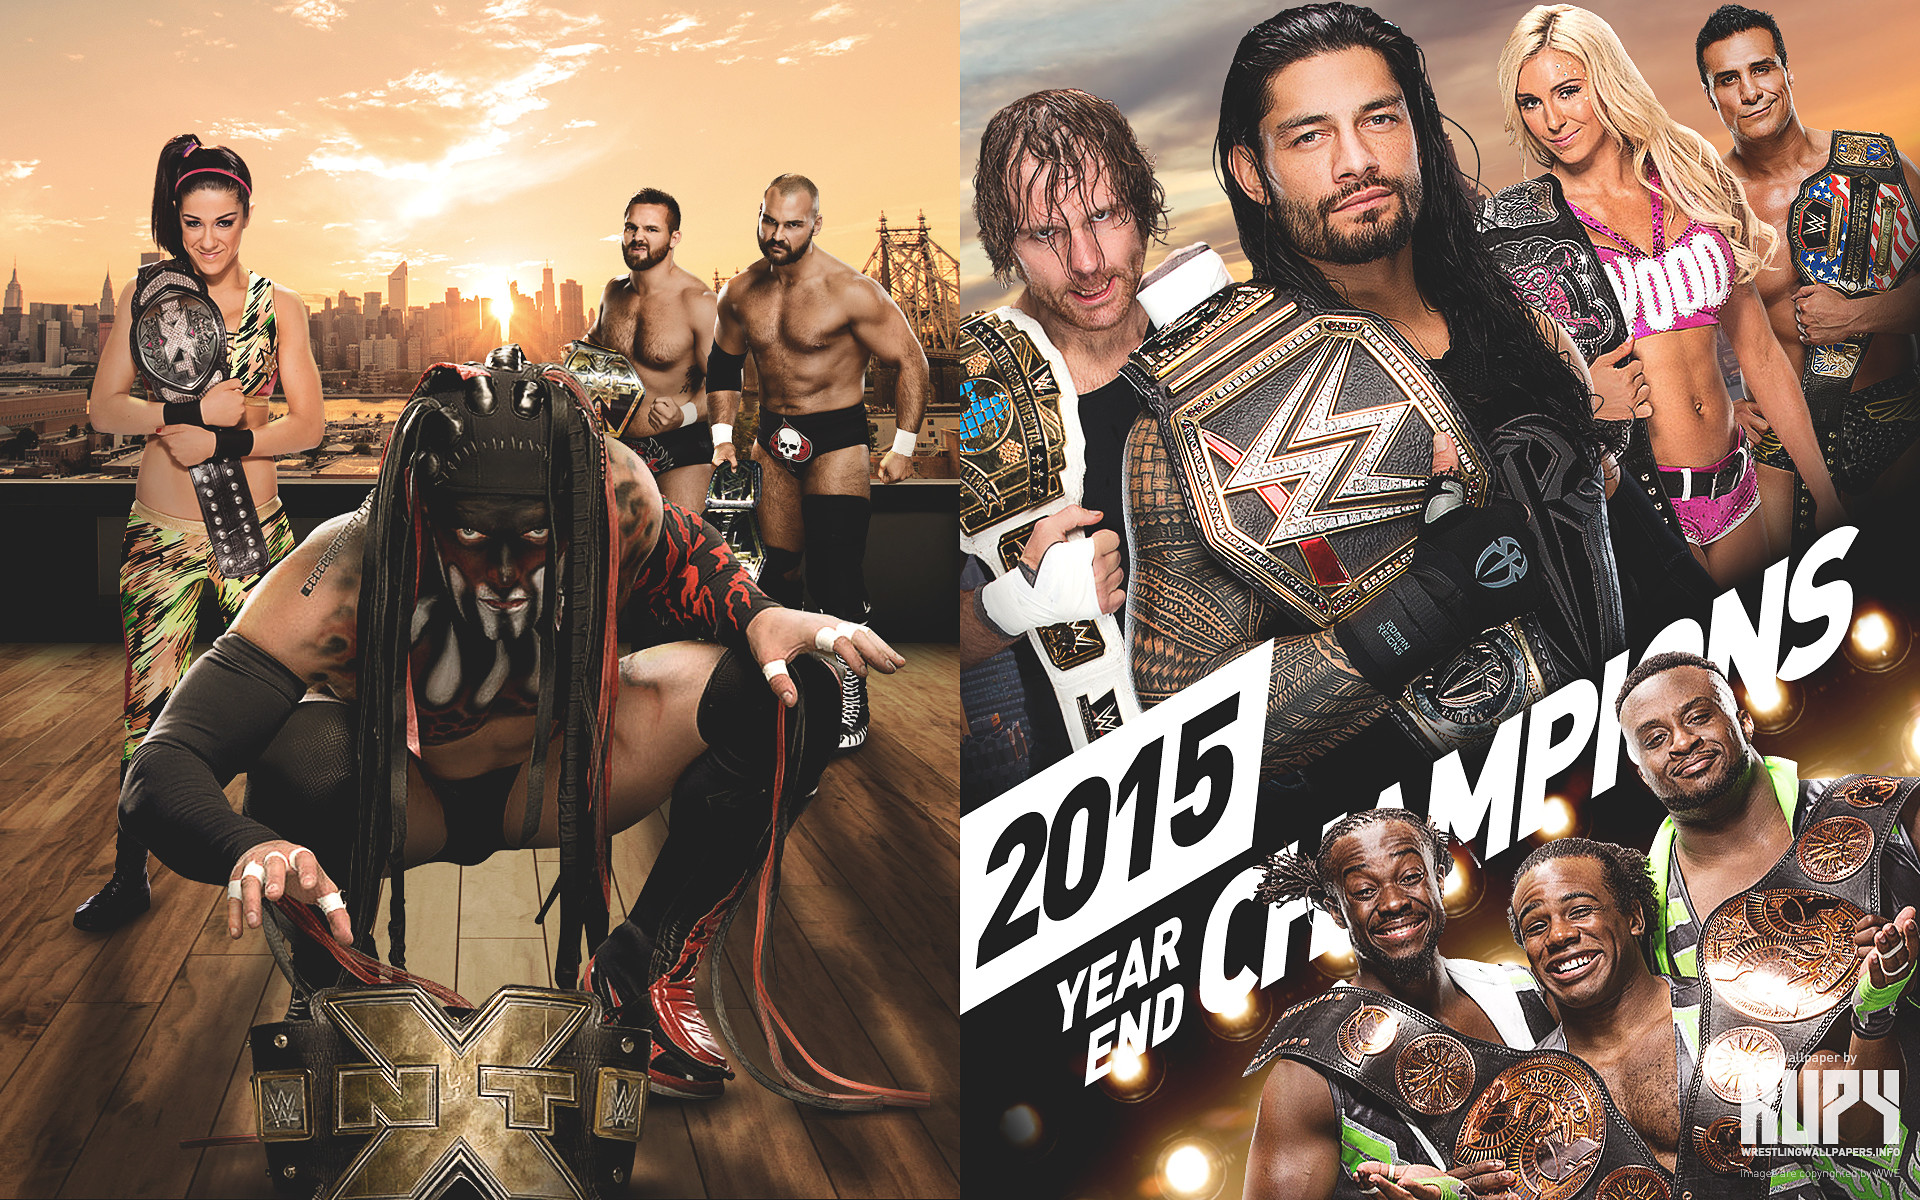 WWE the Shield Wallpaper (82+ images)